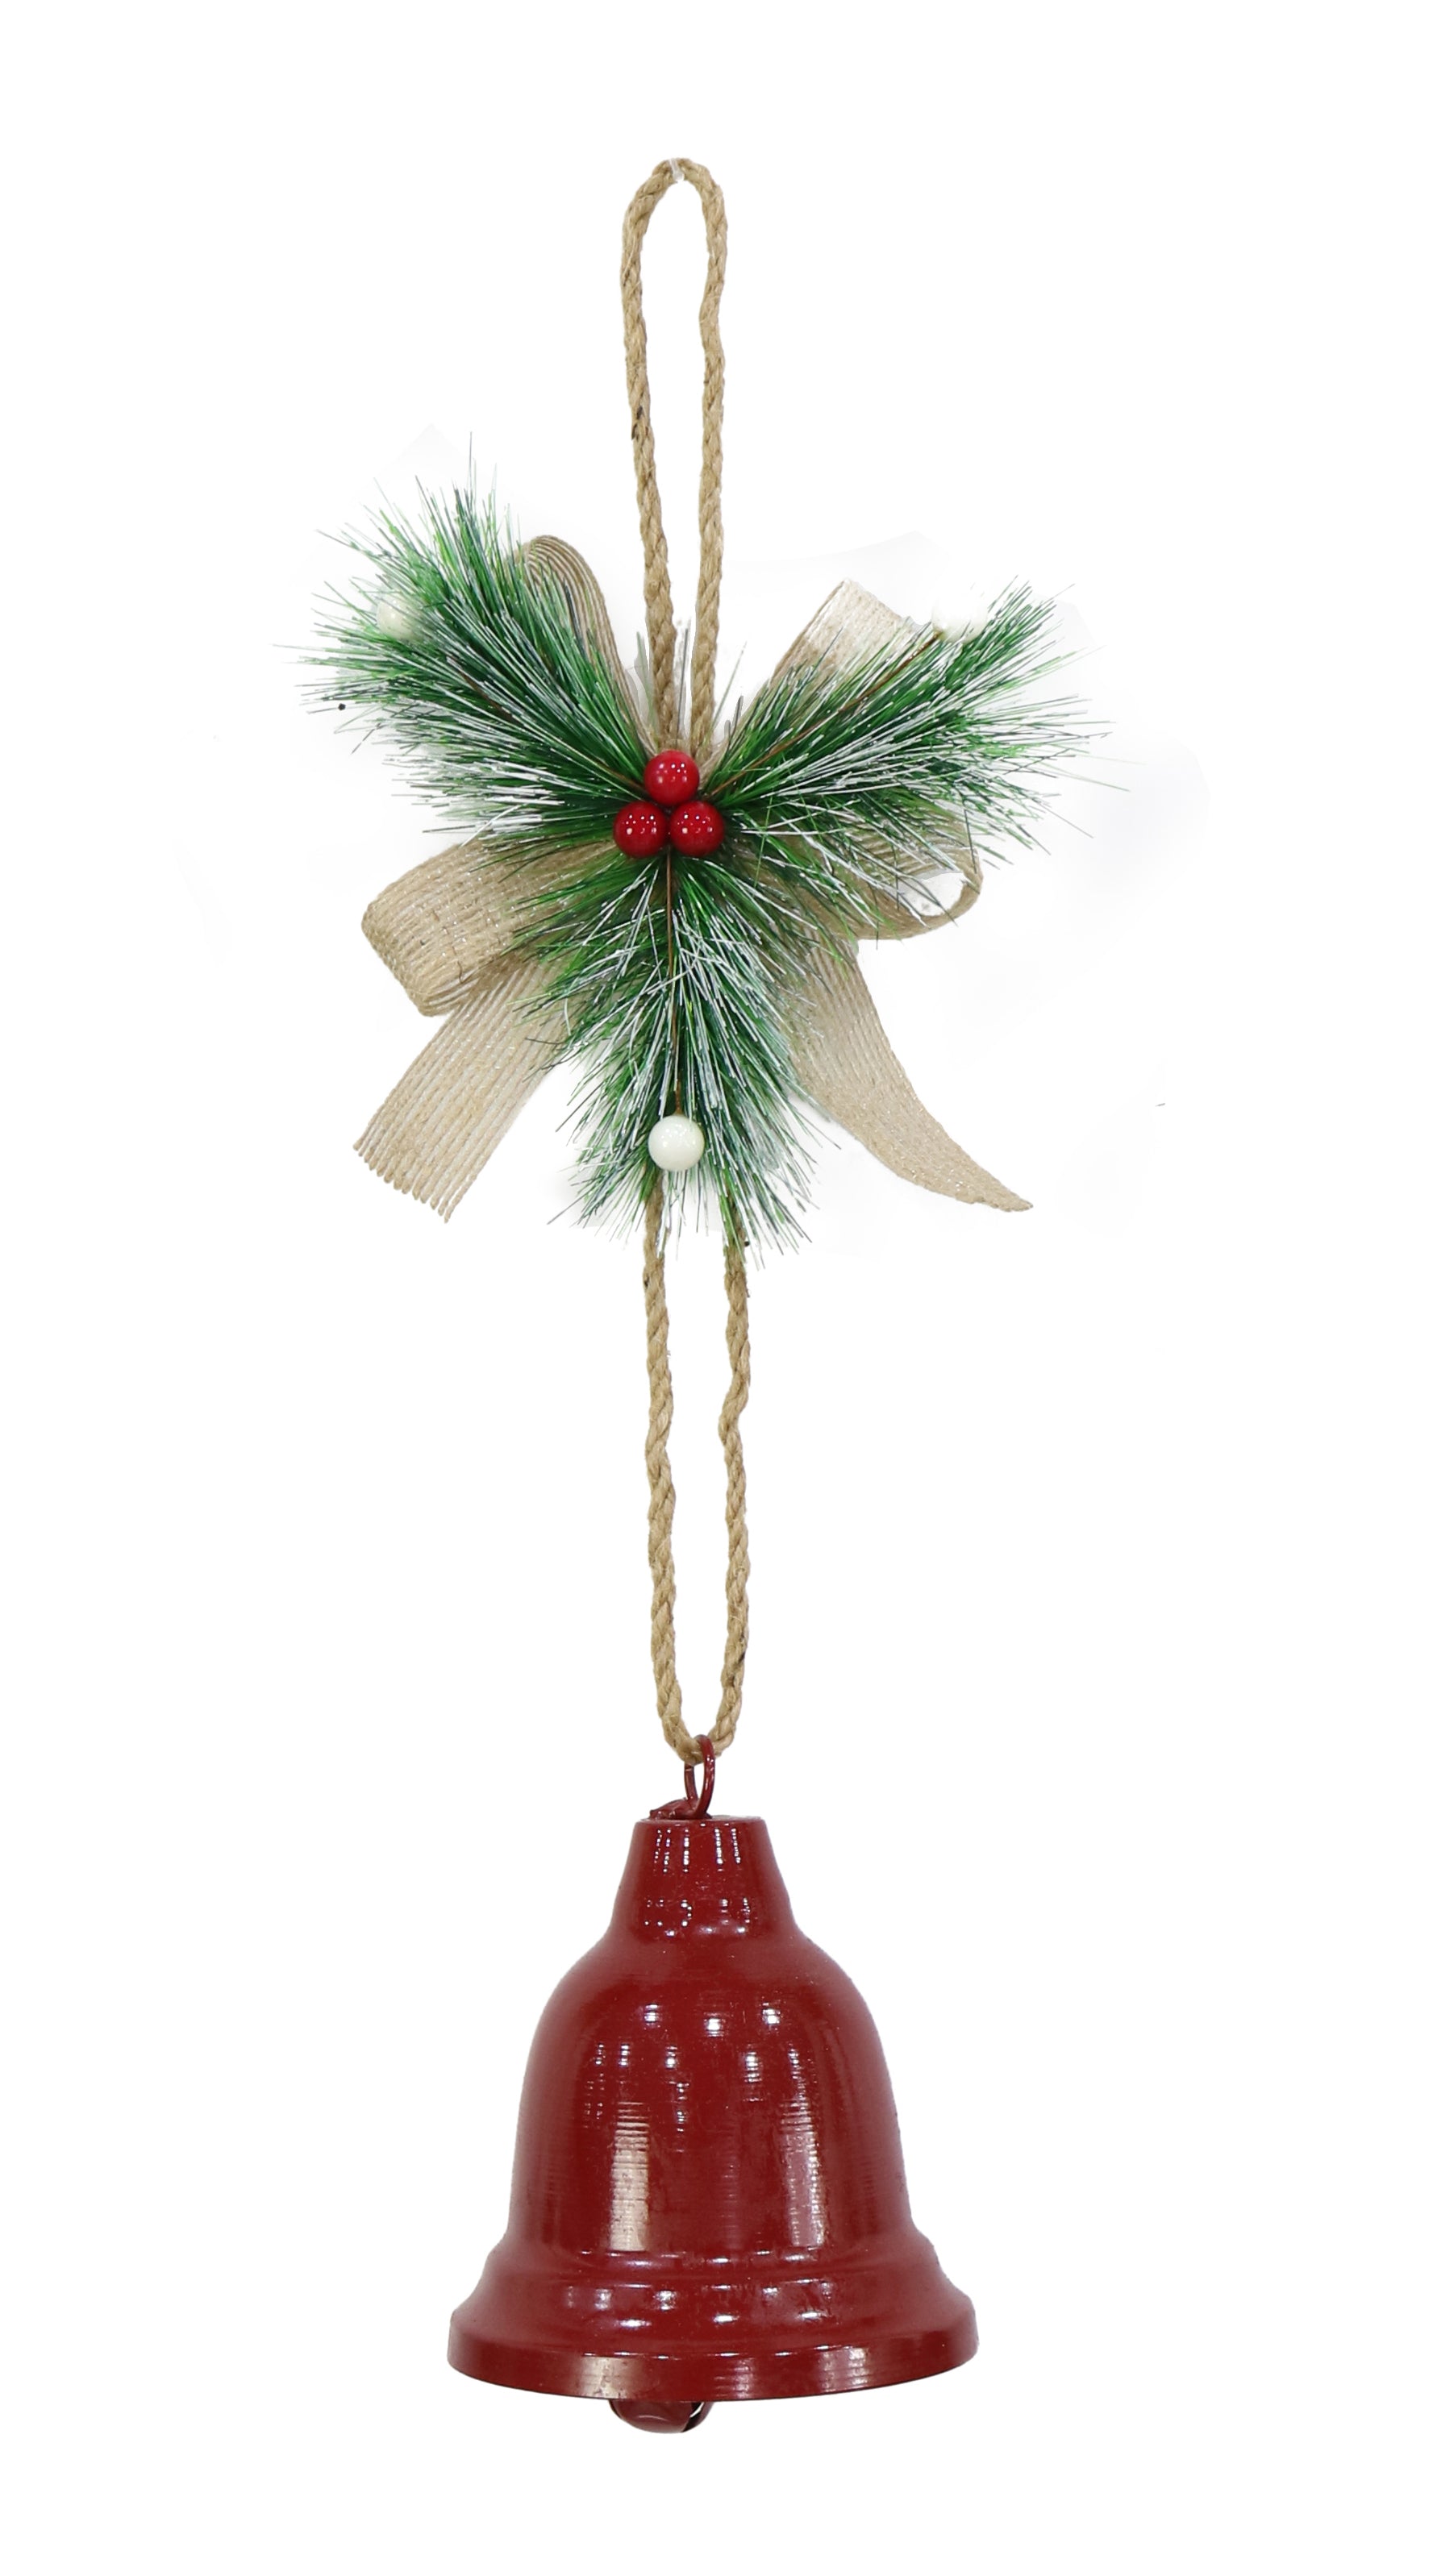 Hanging Bell Decoration With Berry And Grass - Red, 1pc